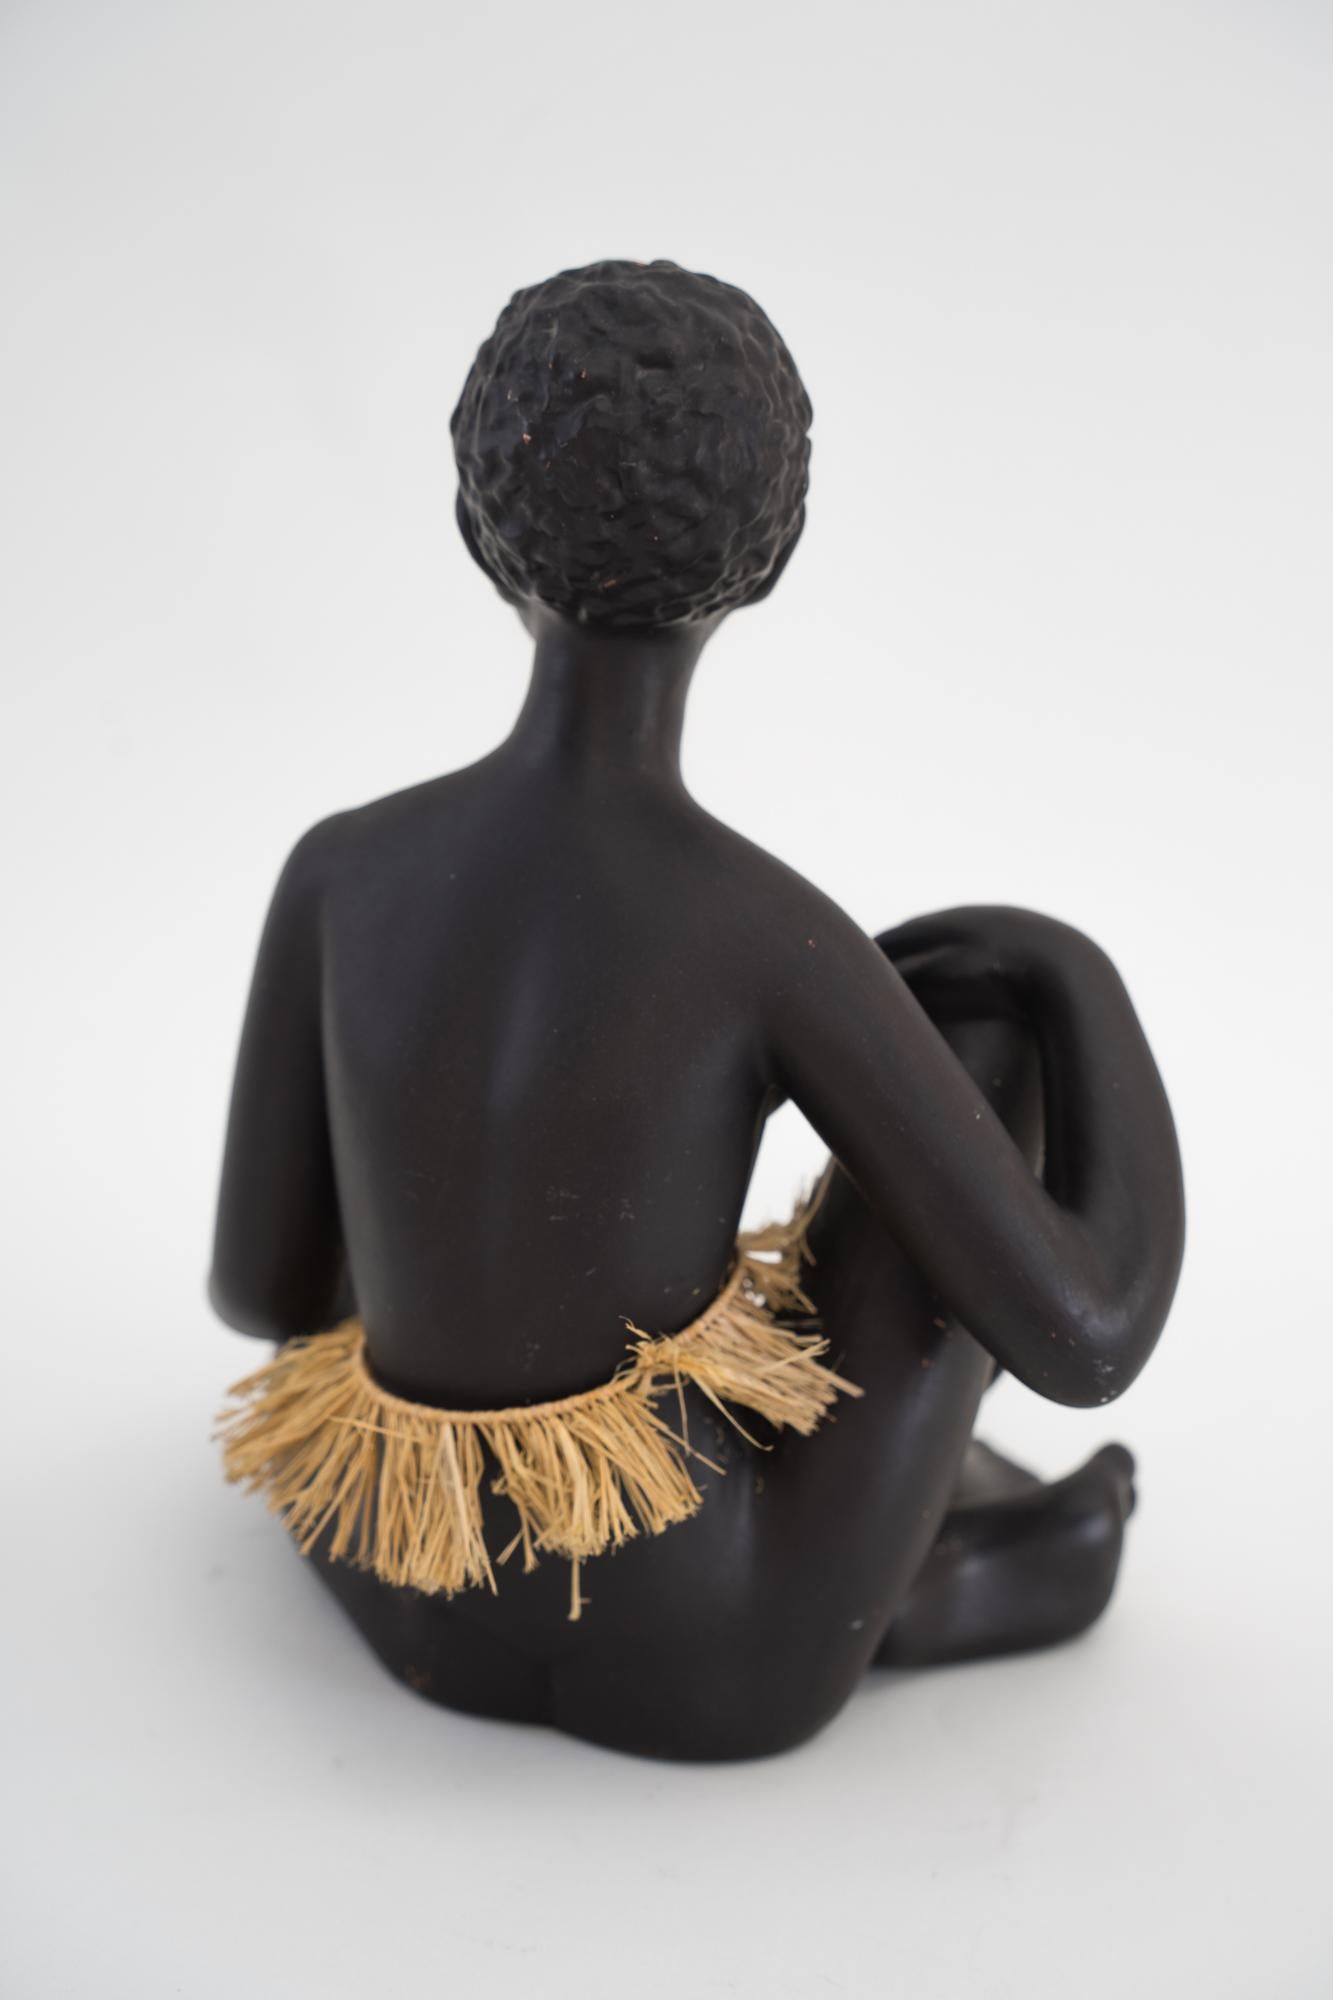 Austrian Exotic African Women Sculpture by Leopold Anzengruber, Vienna 1950s For Sale